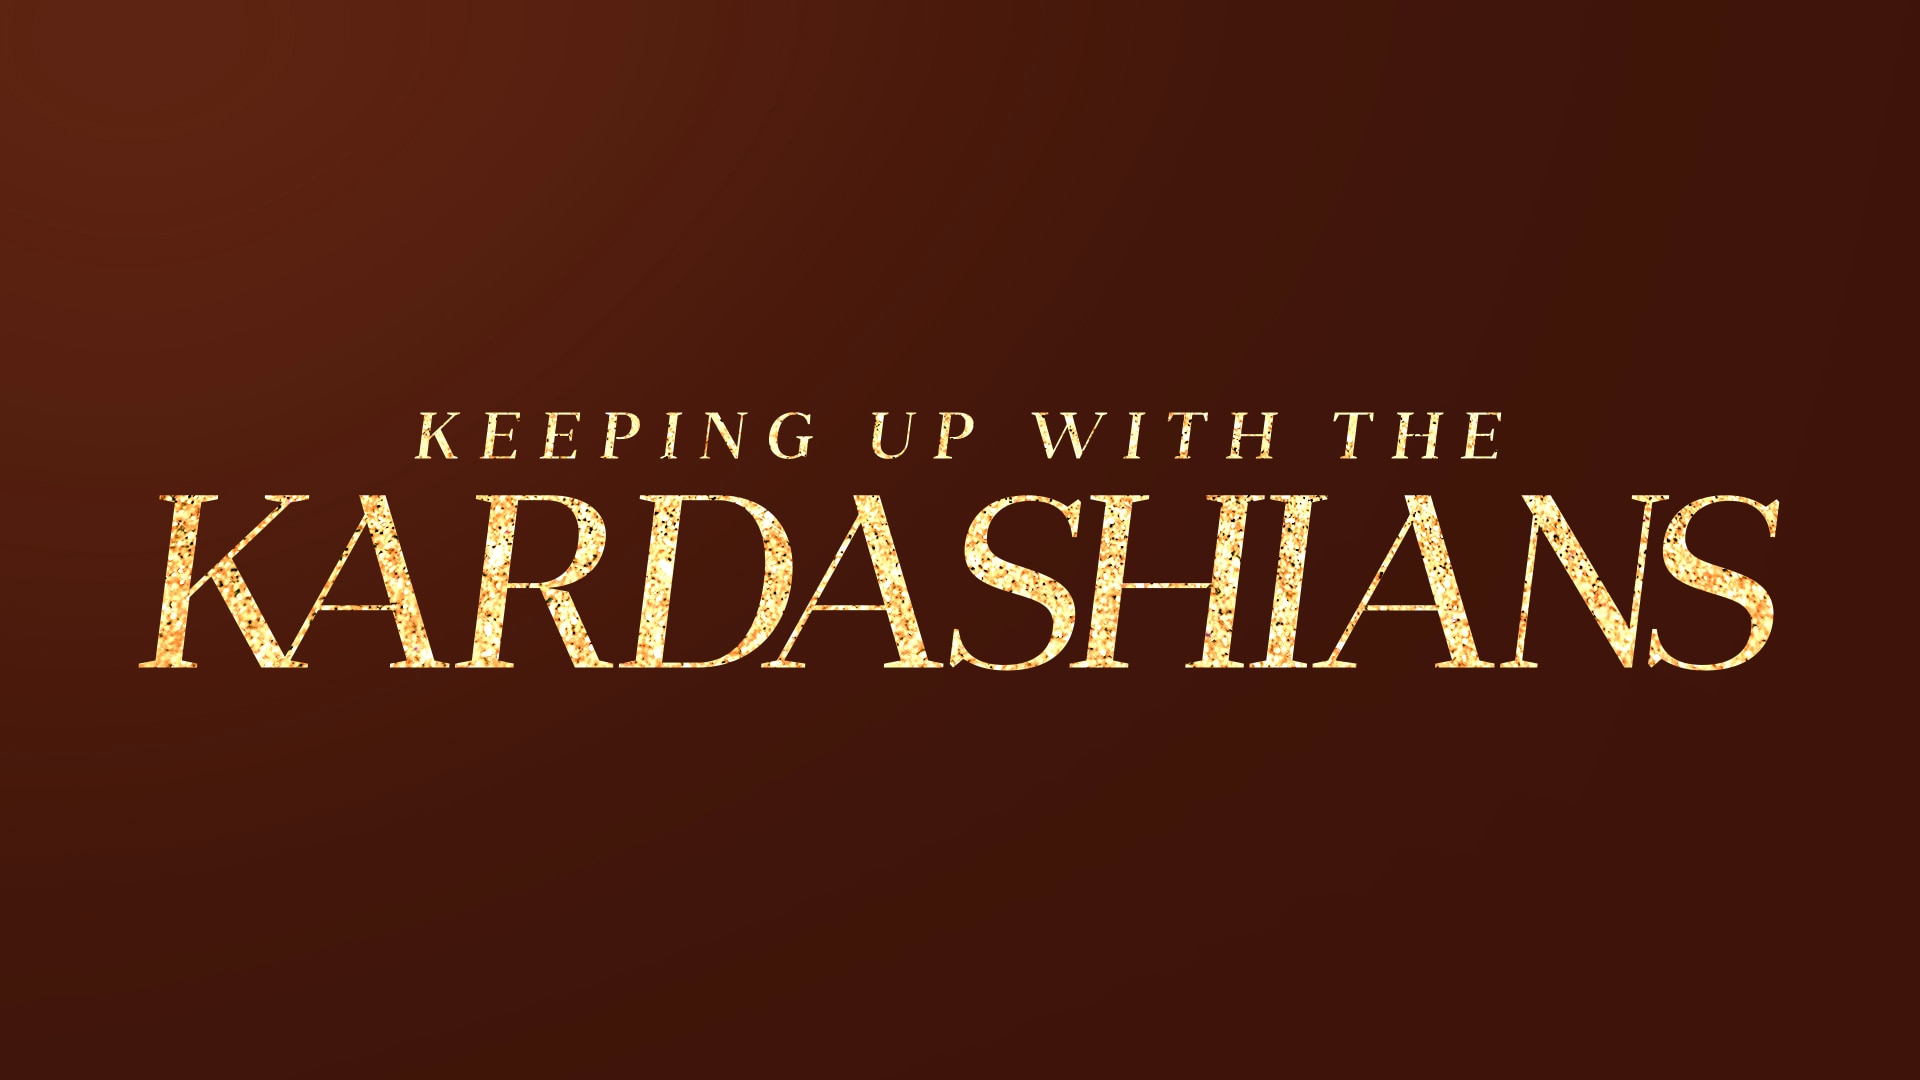 Keeping Up With The Kardashians 2021 Wallpapers